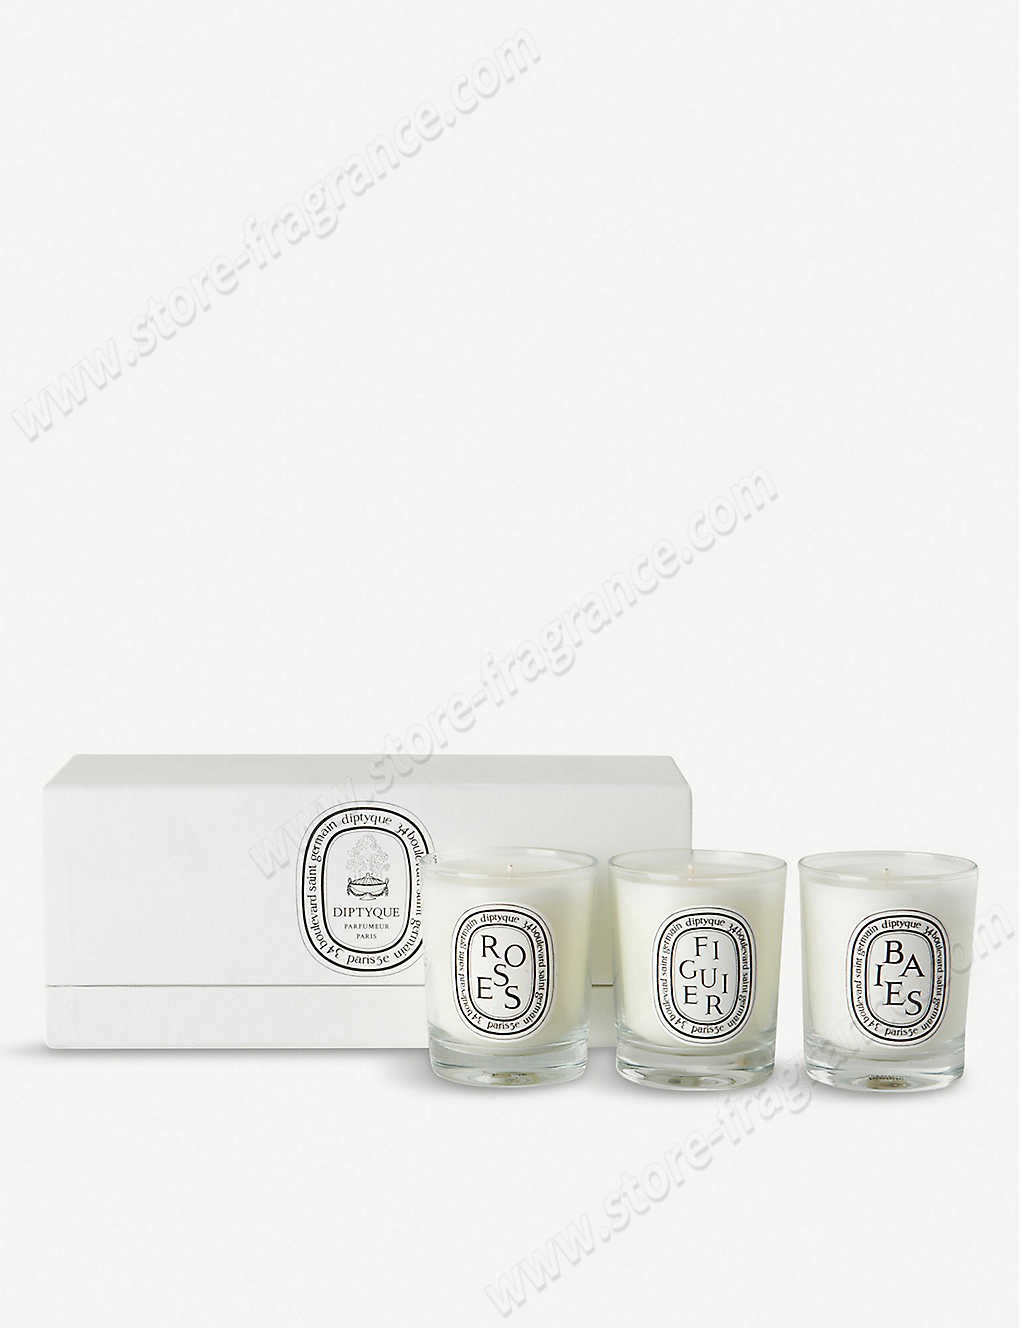 DIPTYQUE/Baies, Figuier and Roses mini candles 3 x 70g ✿ Discount Store - DIPTYQUE/Baies, Figuier and Roses mini candles 3 x 70g ✿ Discount Store